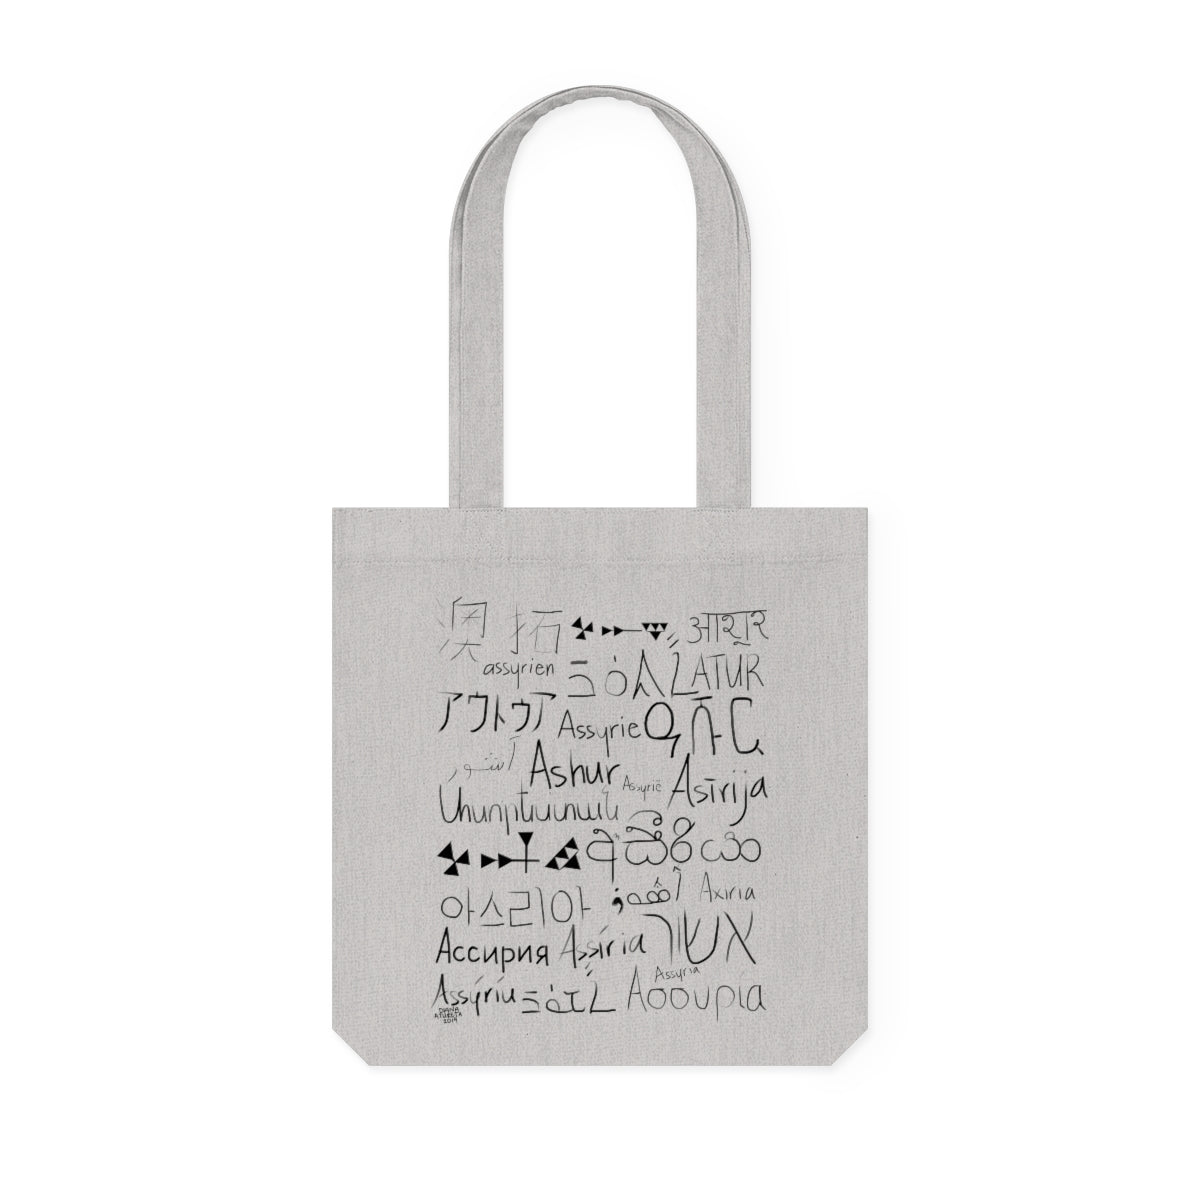 Assyria Around the World - Woven Tote Bag